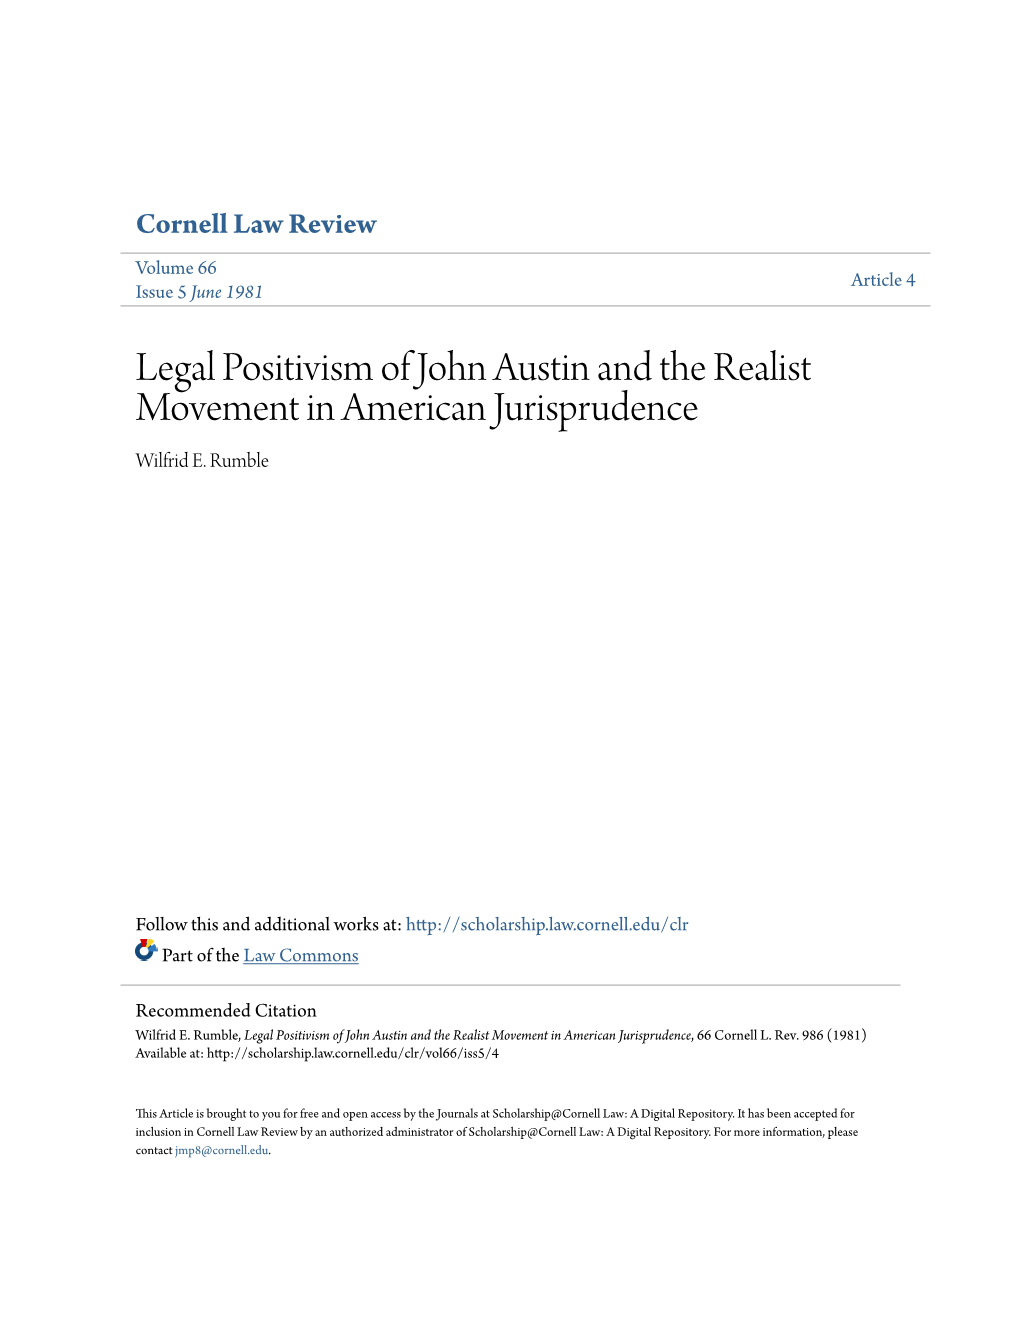 Legal Positivism of John Austin and the Realist Movement in American Jurisprudence Wilfrid E